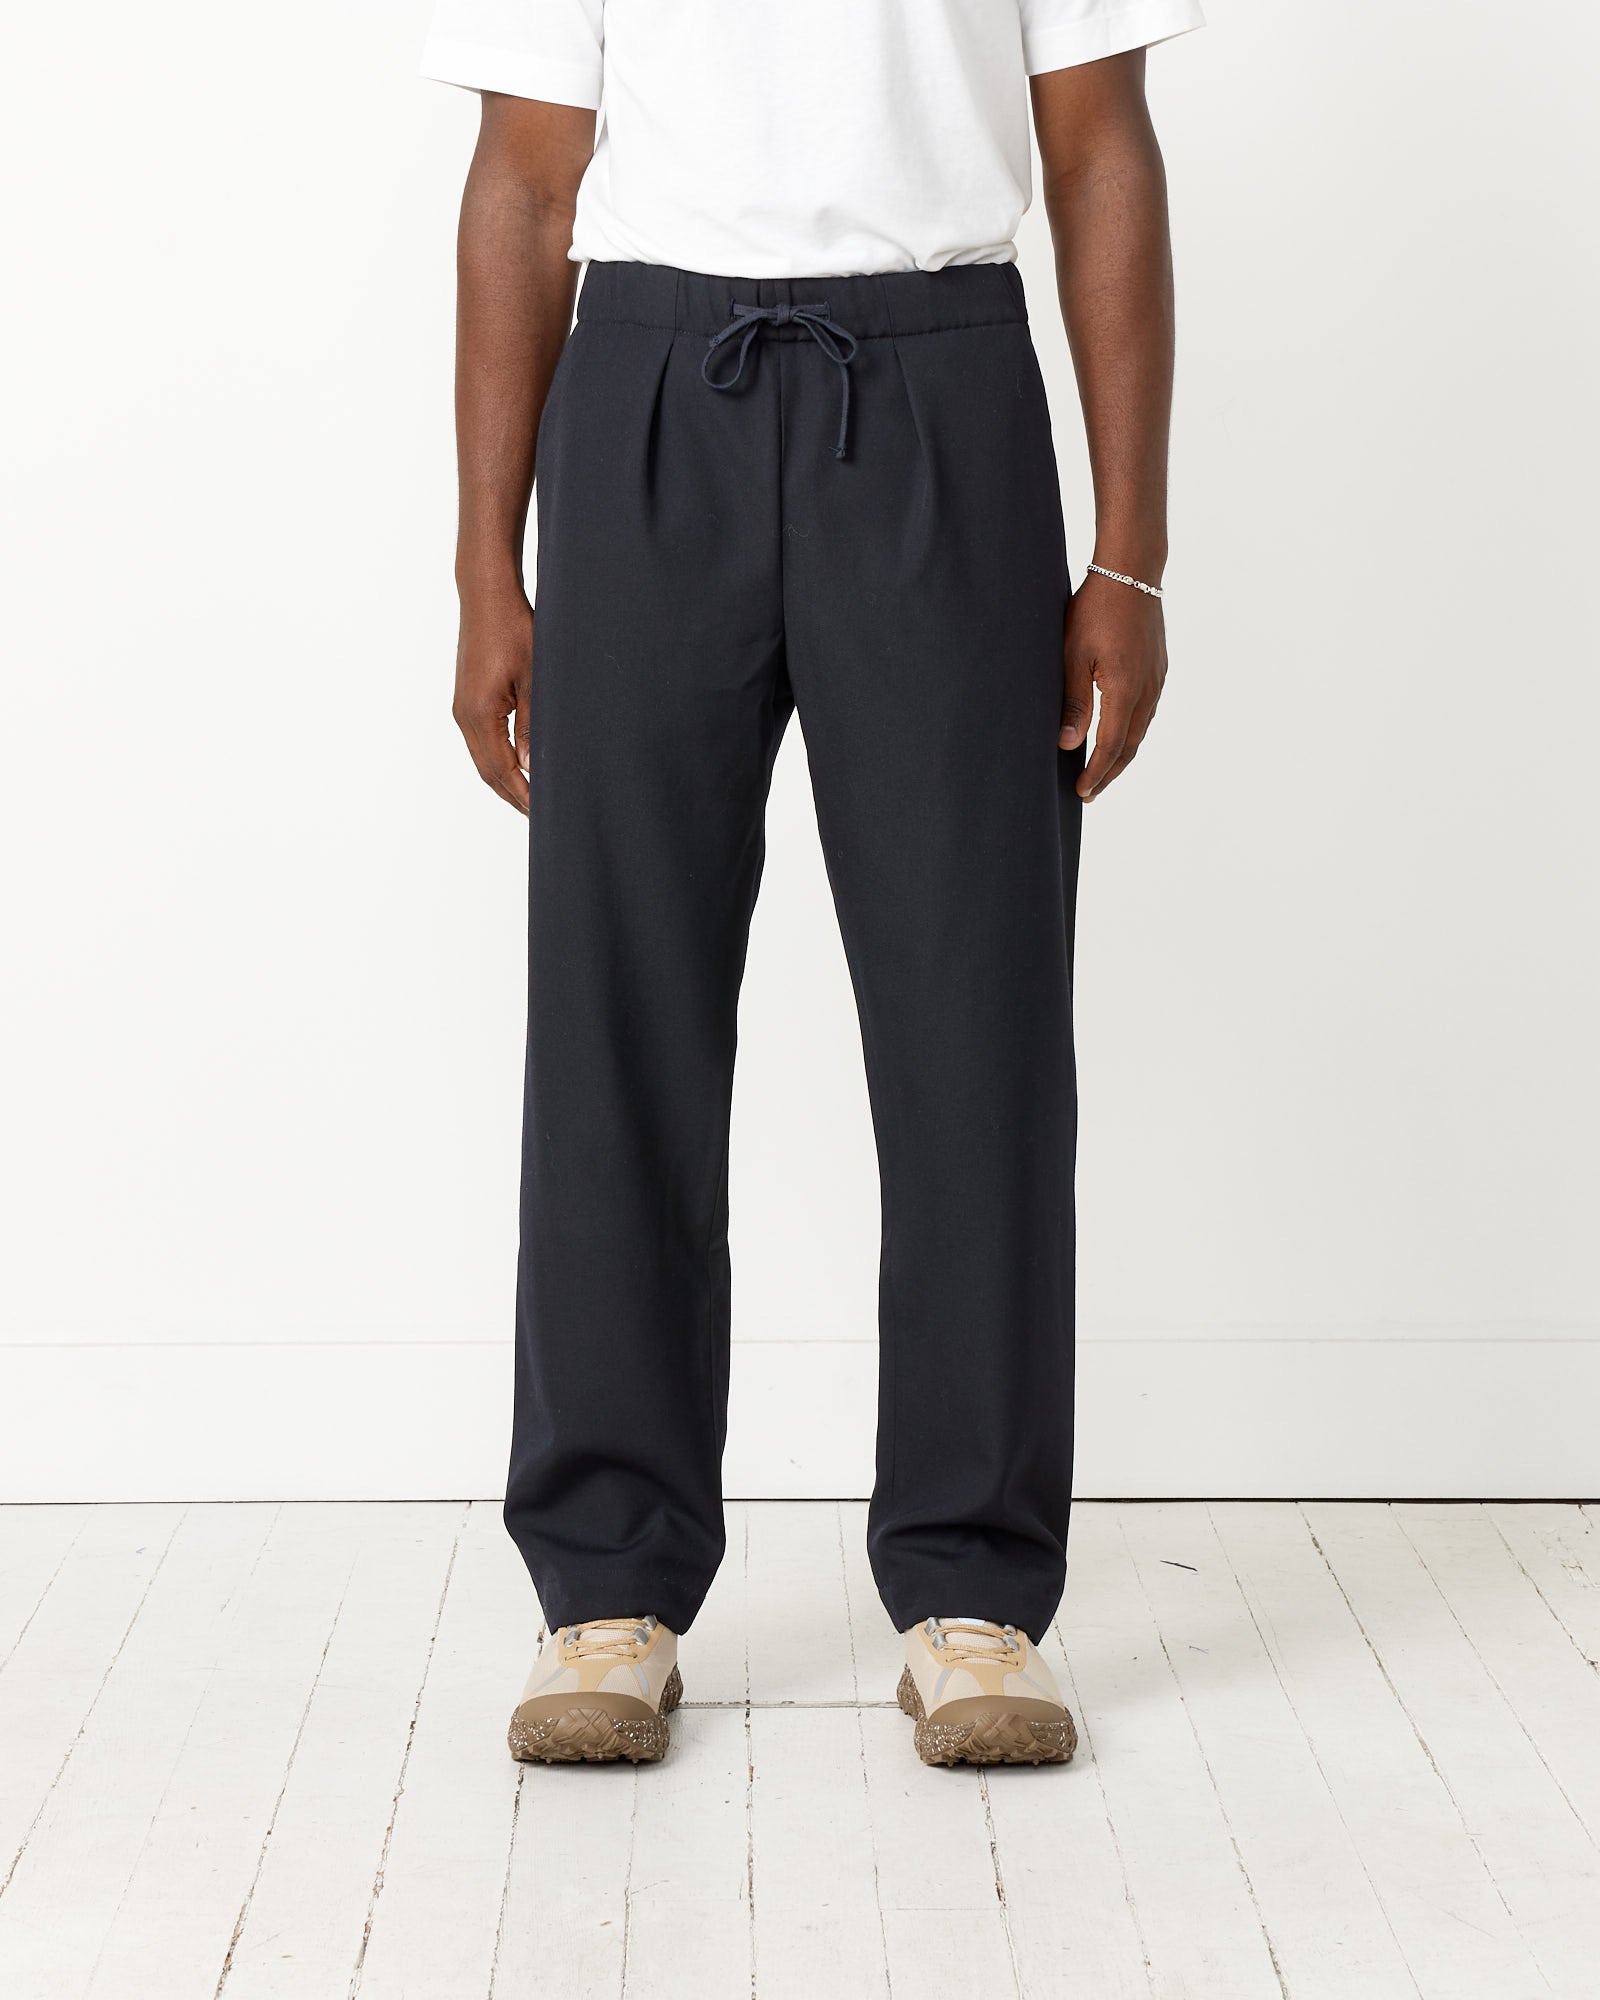 Mohawk General Store | Sillage | Essential Baggy Trousers in ...